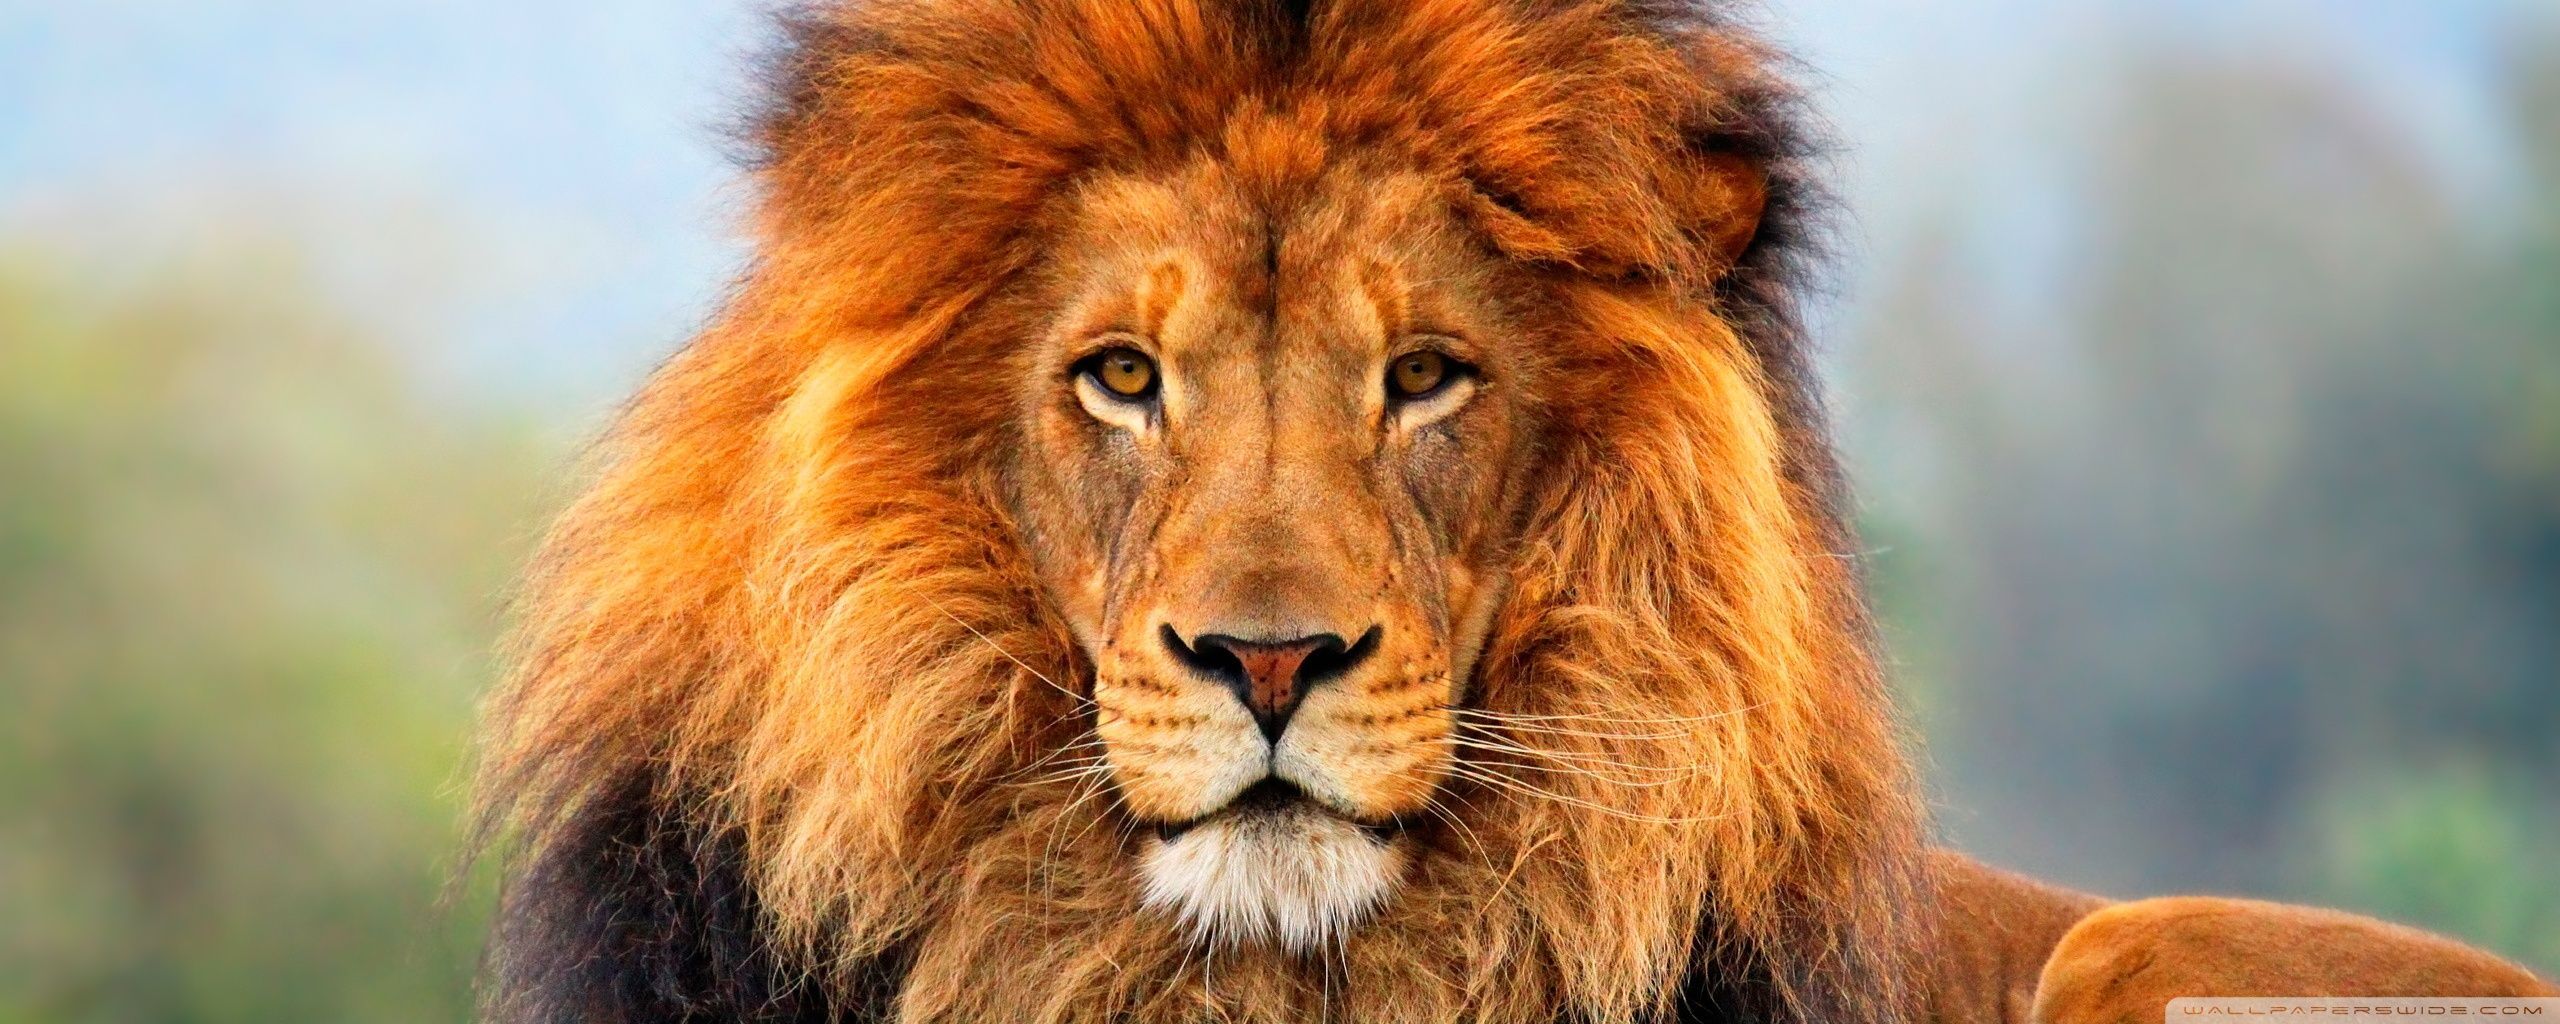 Lion Wallpapers - Wallmanage.com